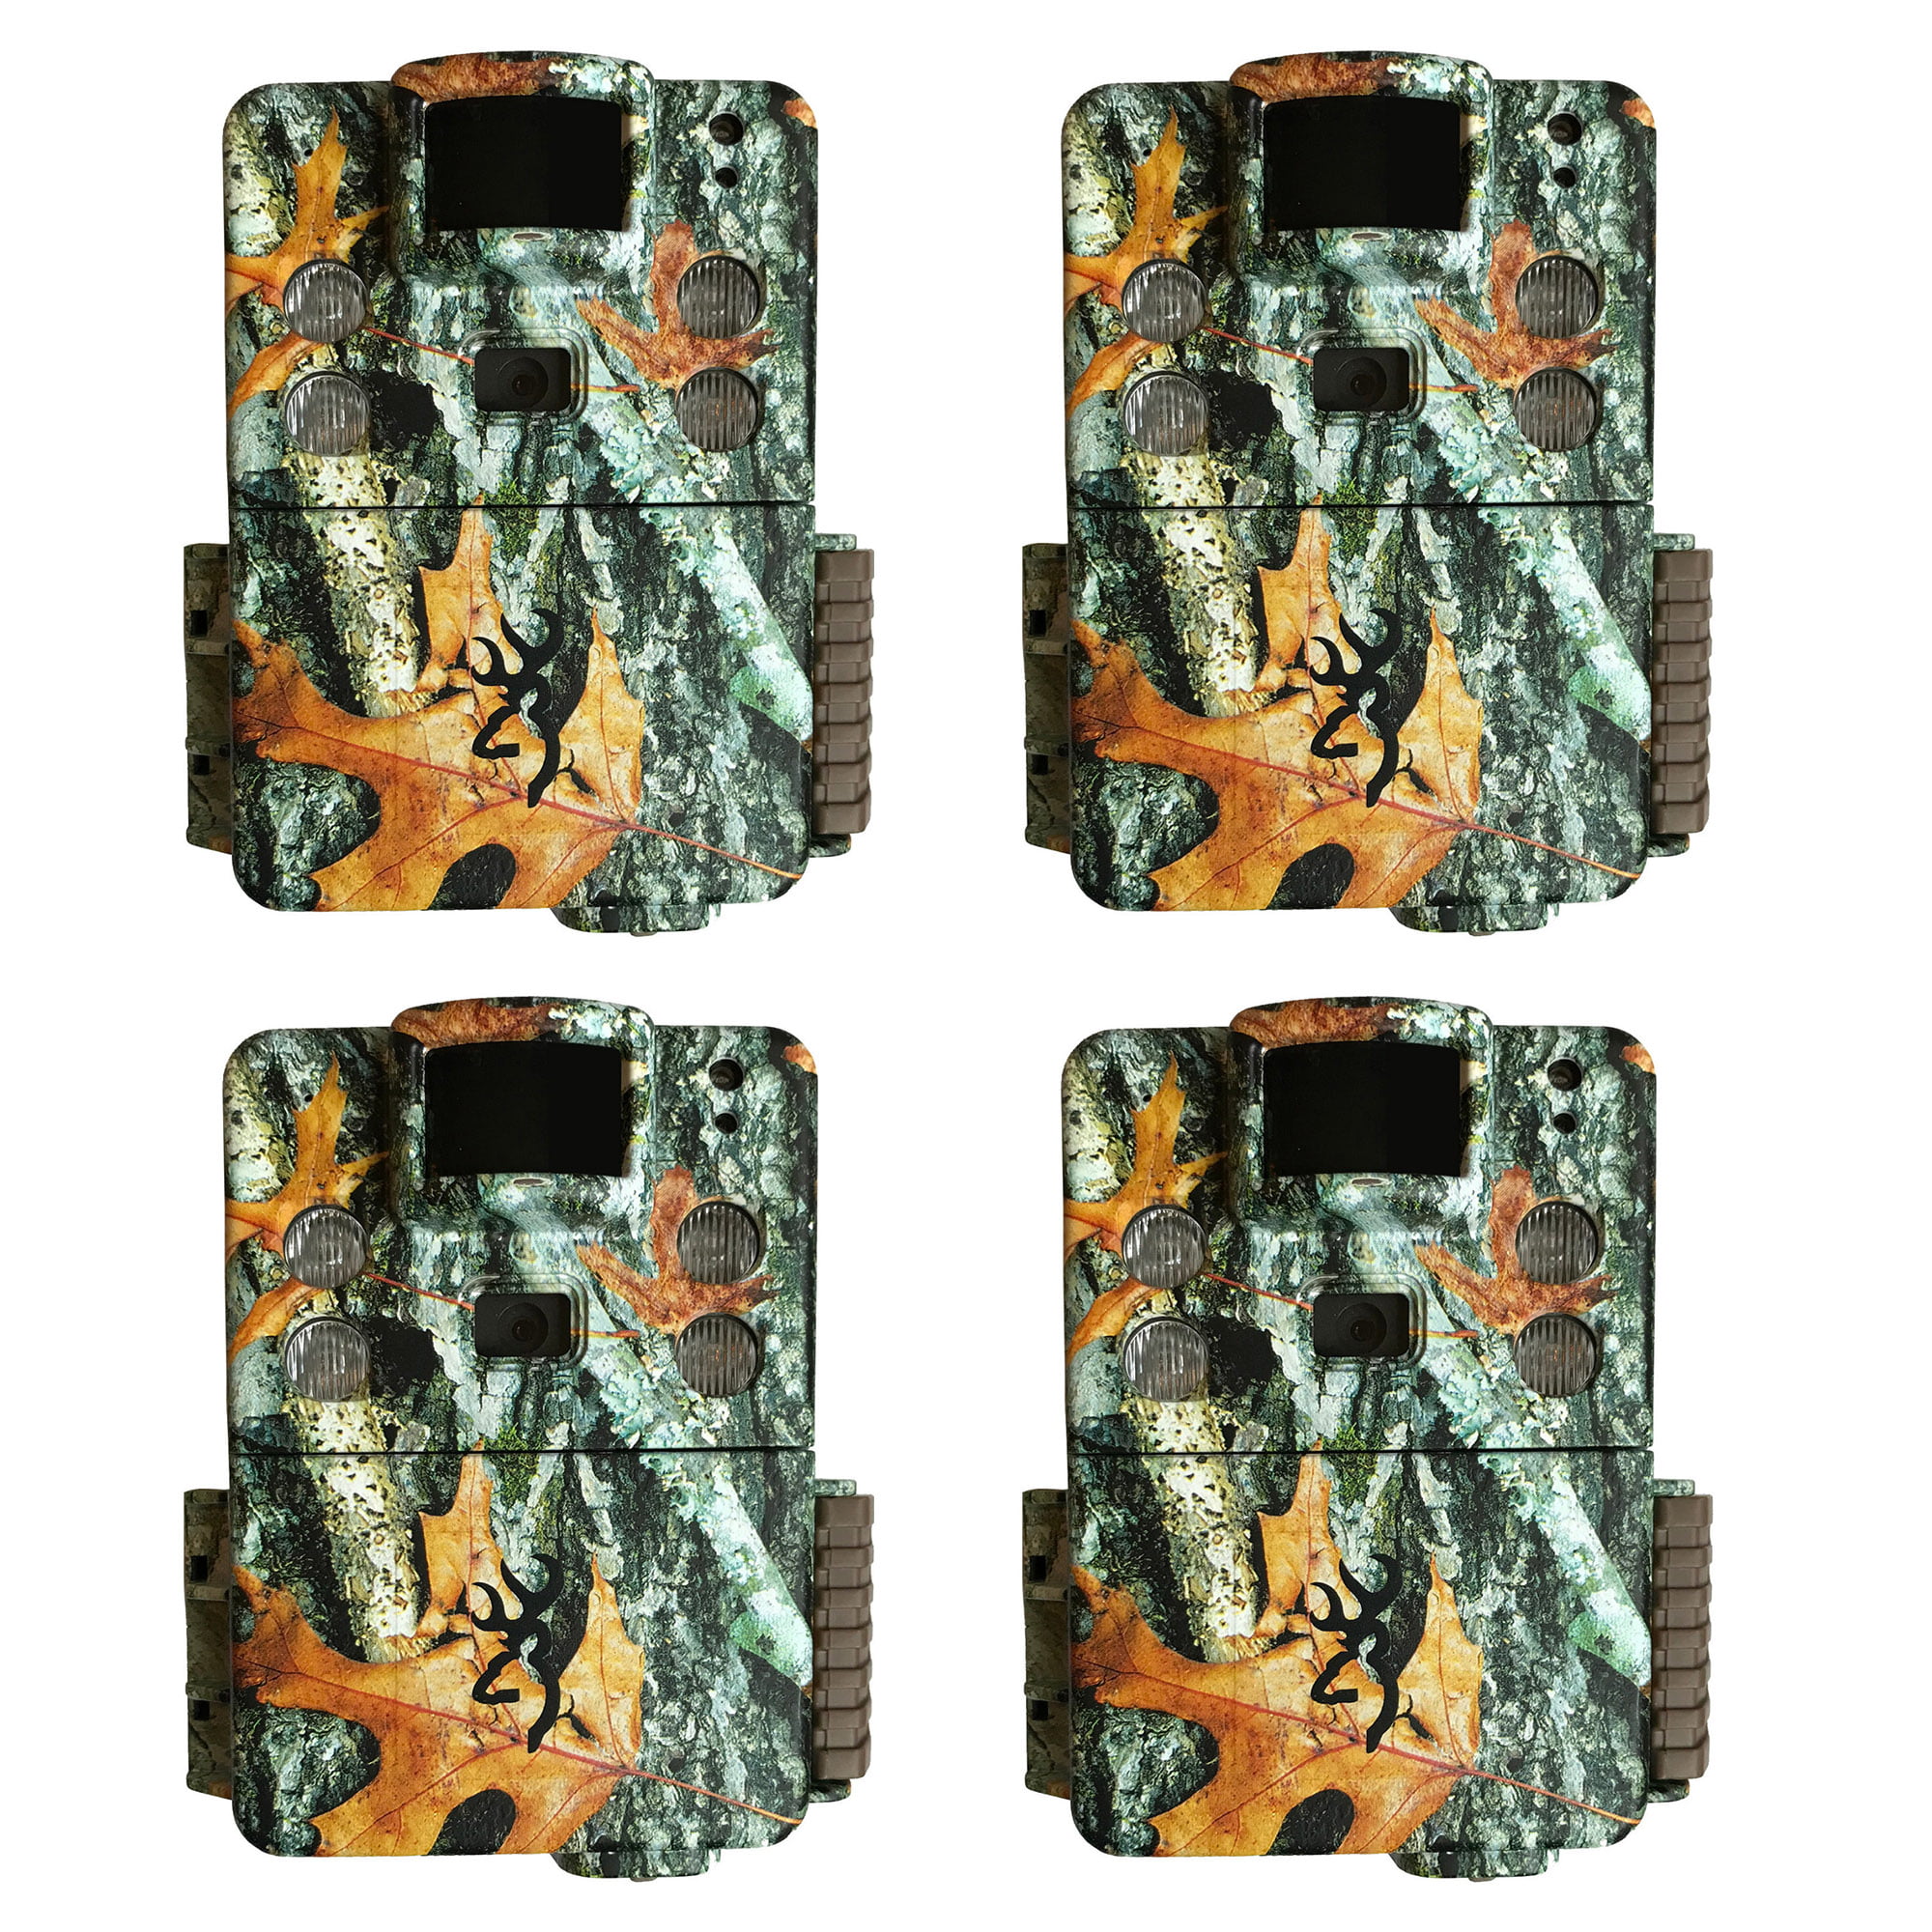 Browning BTC-5HDPX Game Trail Cameras Strike Force Pro X 20 MP Game Cam Camo